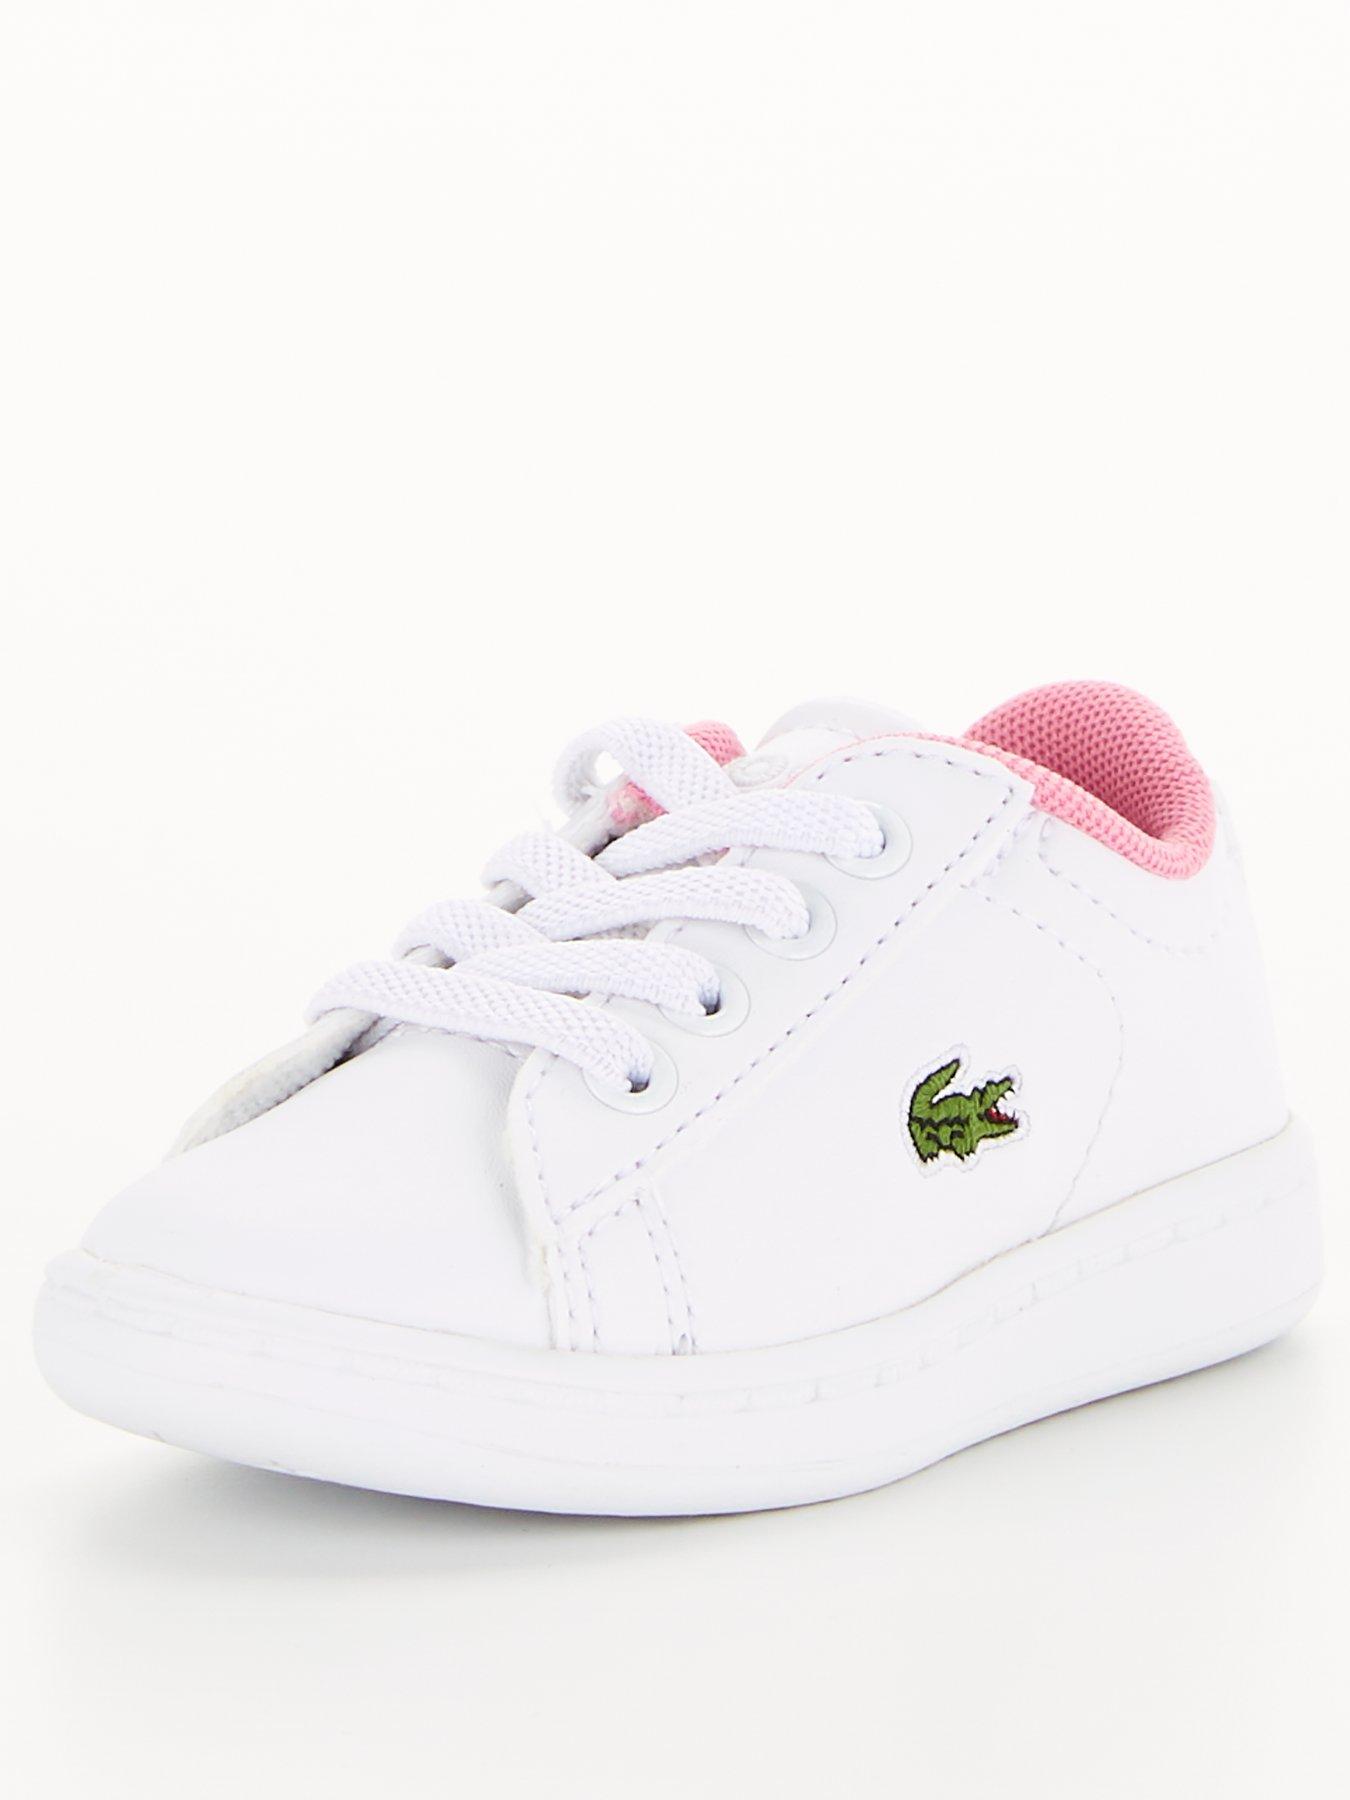 childrens black lacoste trainers